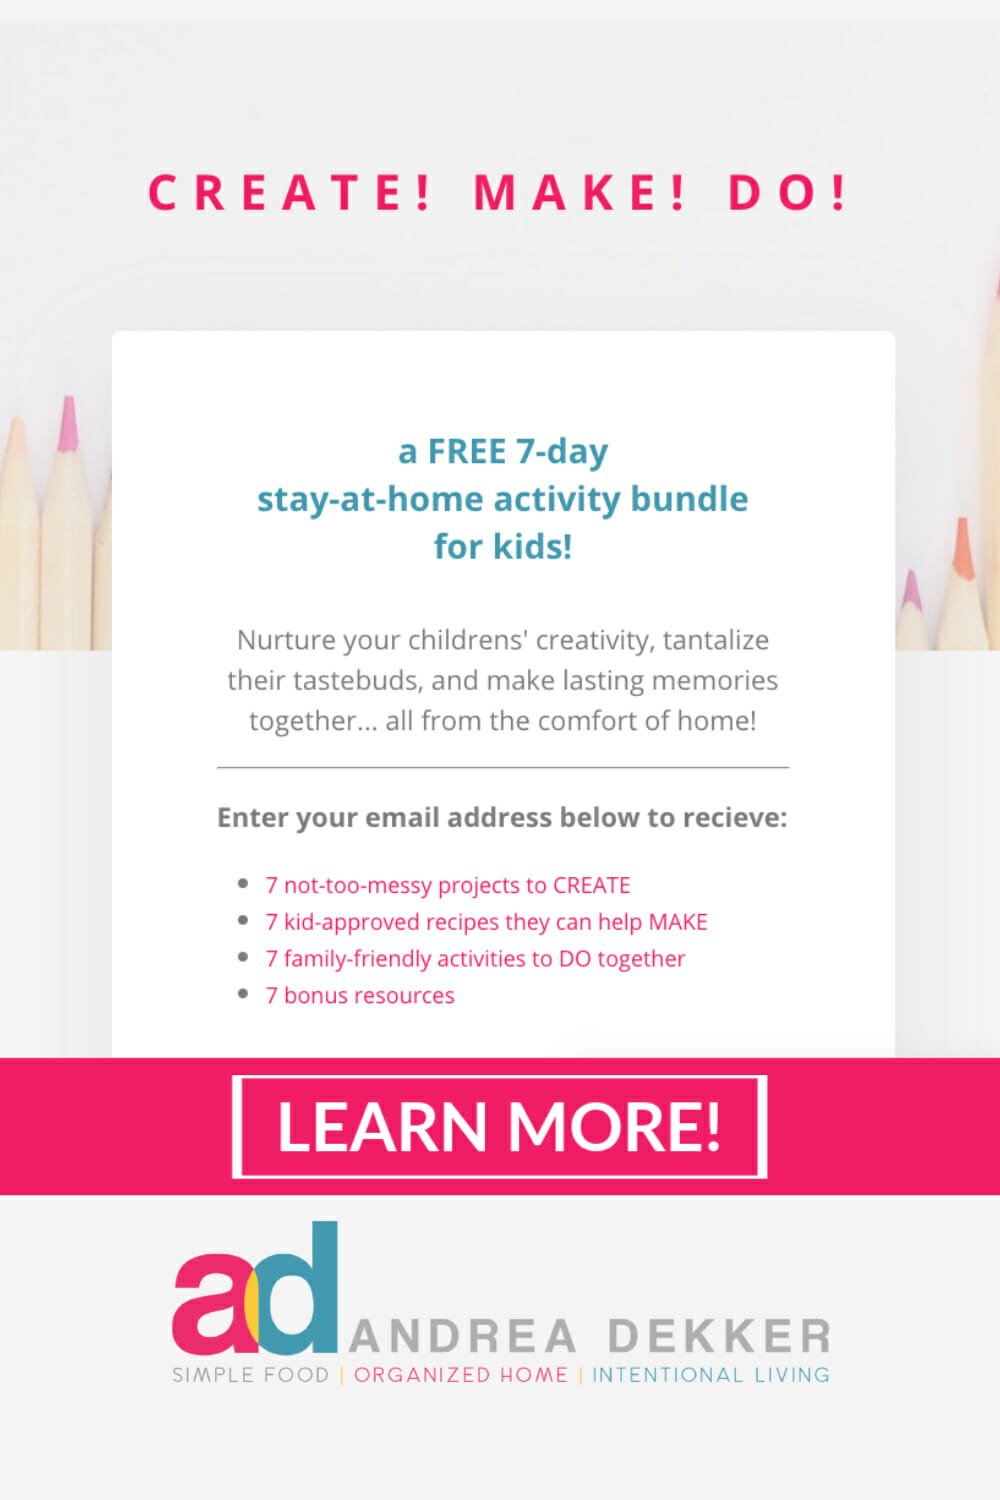 If you have school-age children and could use a little FREE inspiration to keep them busy over the next few weeks, check out this FREE stay-at-home activity bundle for kids! Nurture your children's creativity, tantalize their tastebuds, and make lasting memories together... all from the comfort of home! via @andreadekker